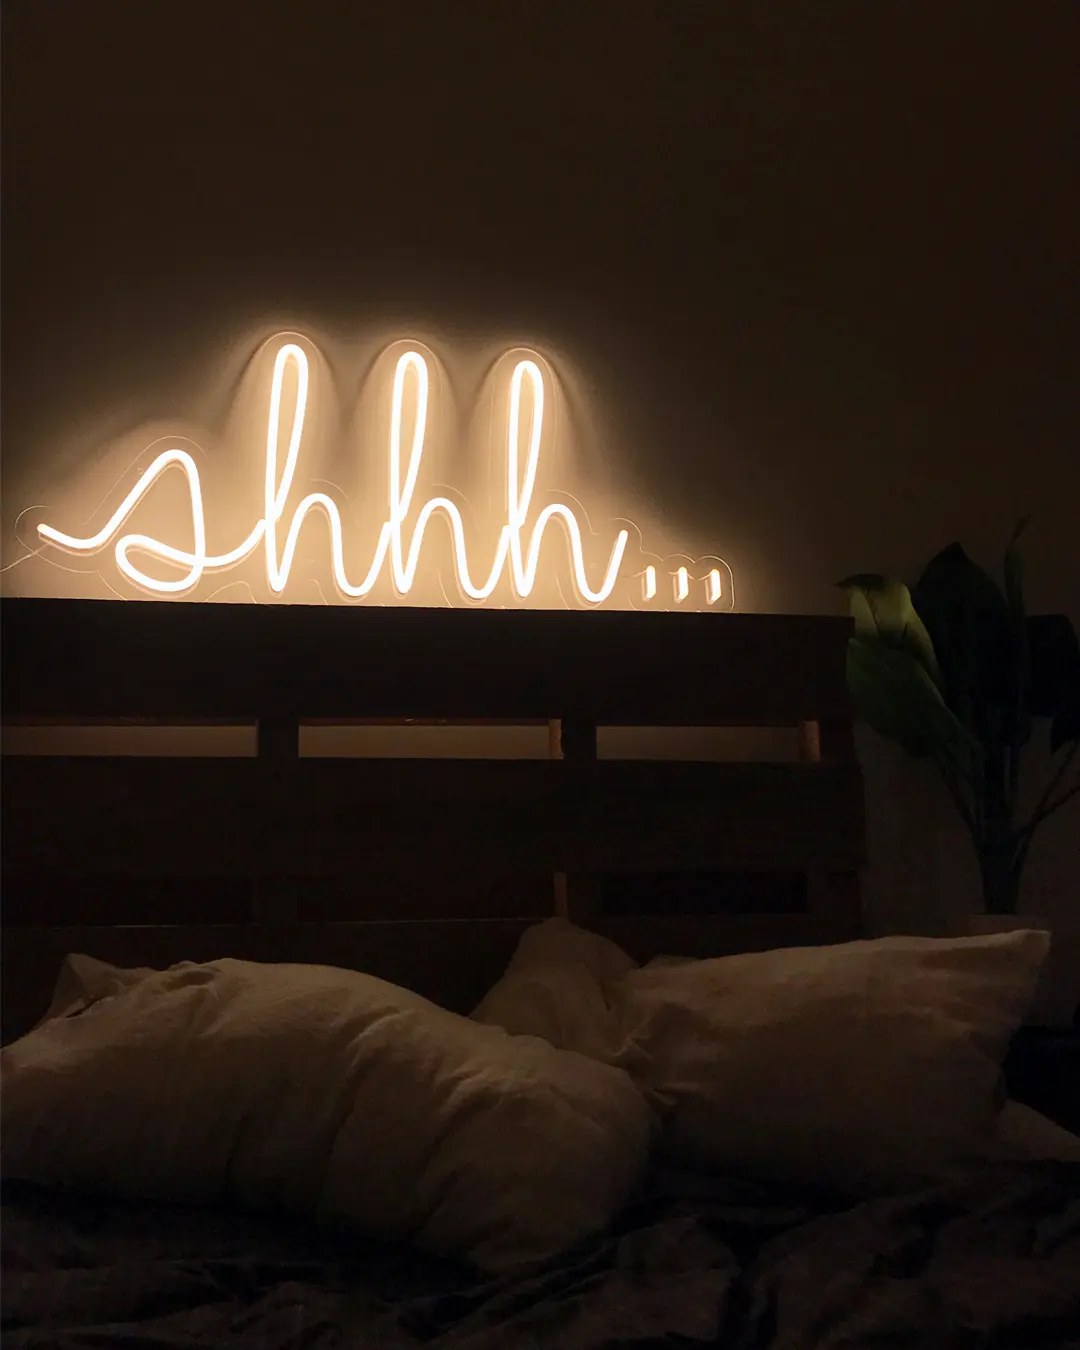 chinese word neon light, neon word sign, neon letter signs words